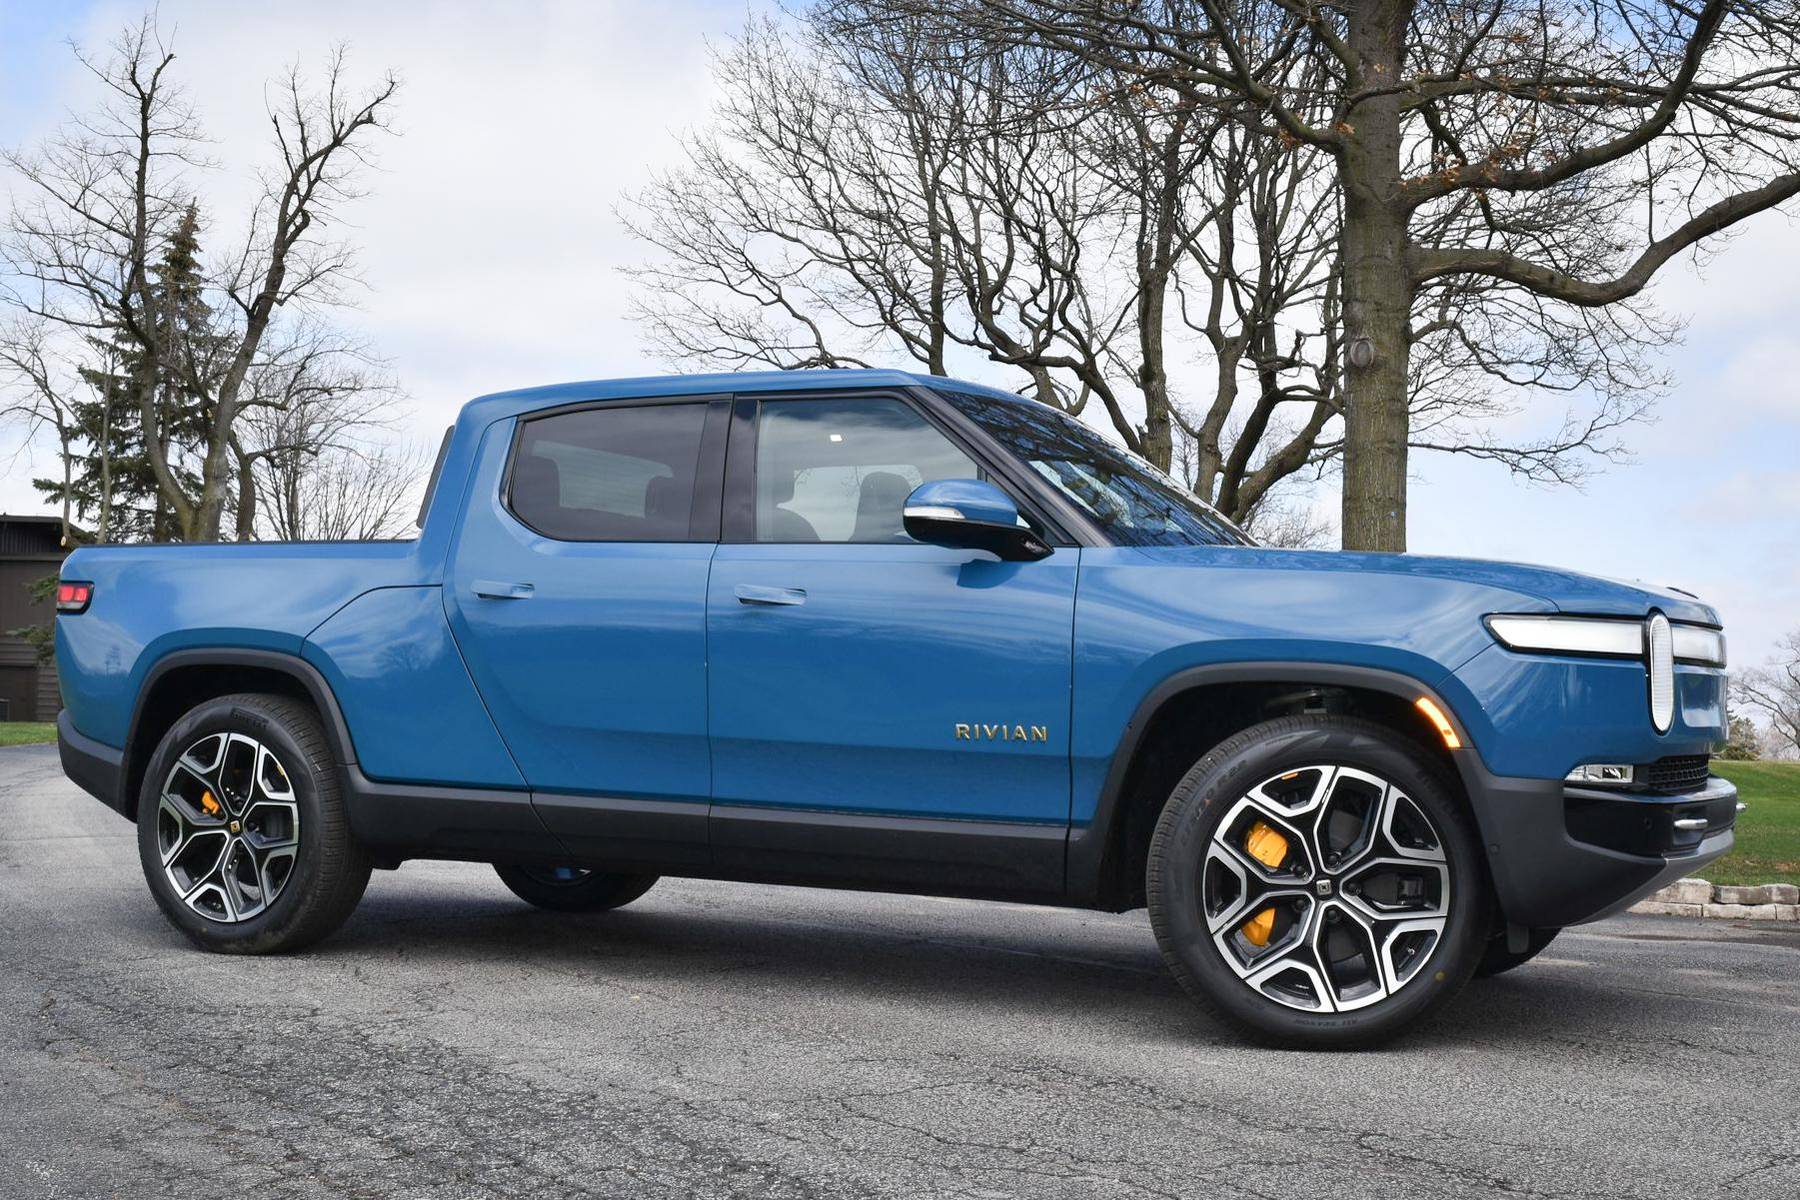 Rivian, the first fully electric pick up truck offered on the market